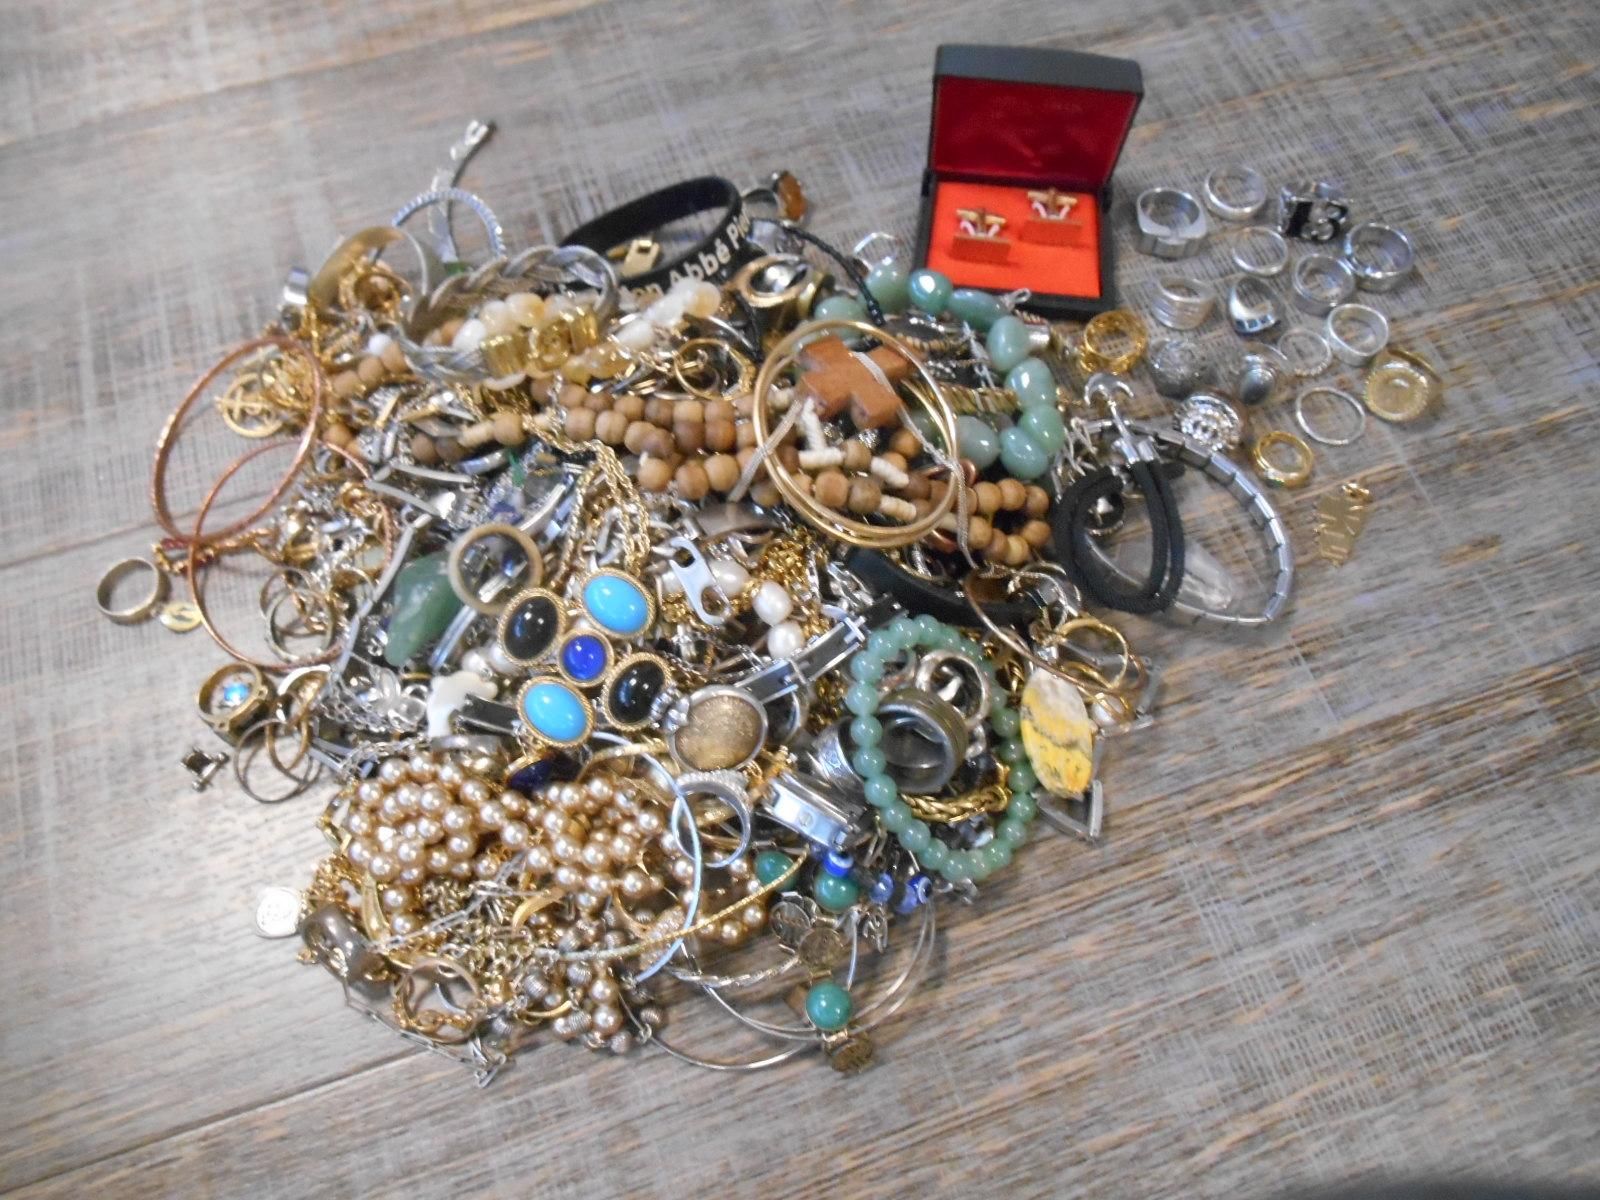 Null Set including:
- about 3 kg of various costume jewelry (rings, chains, pend&hellip;